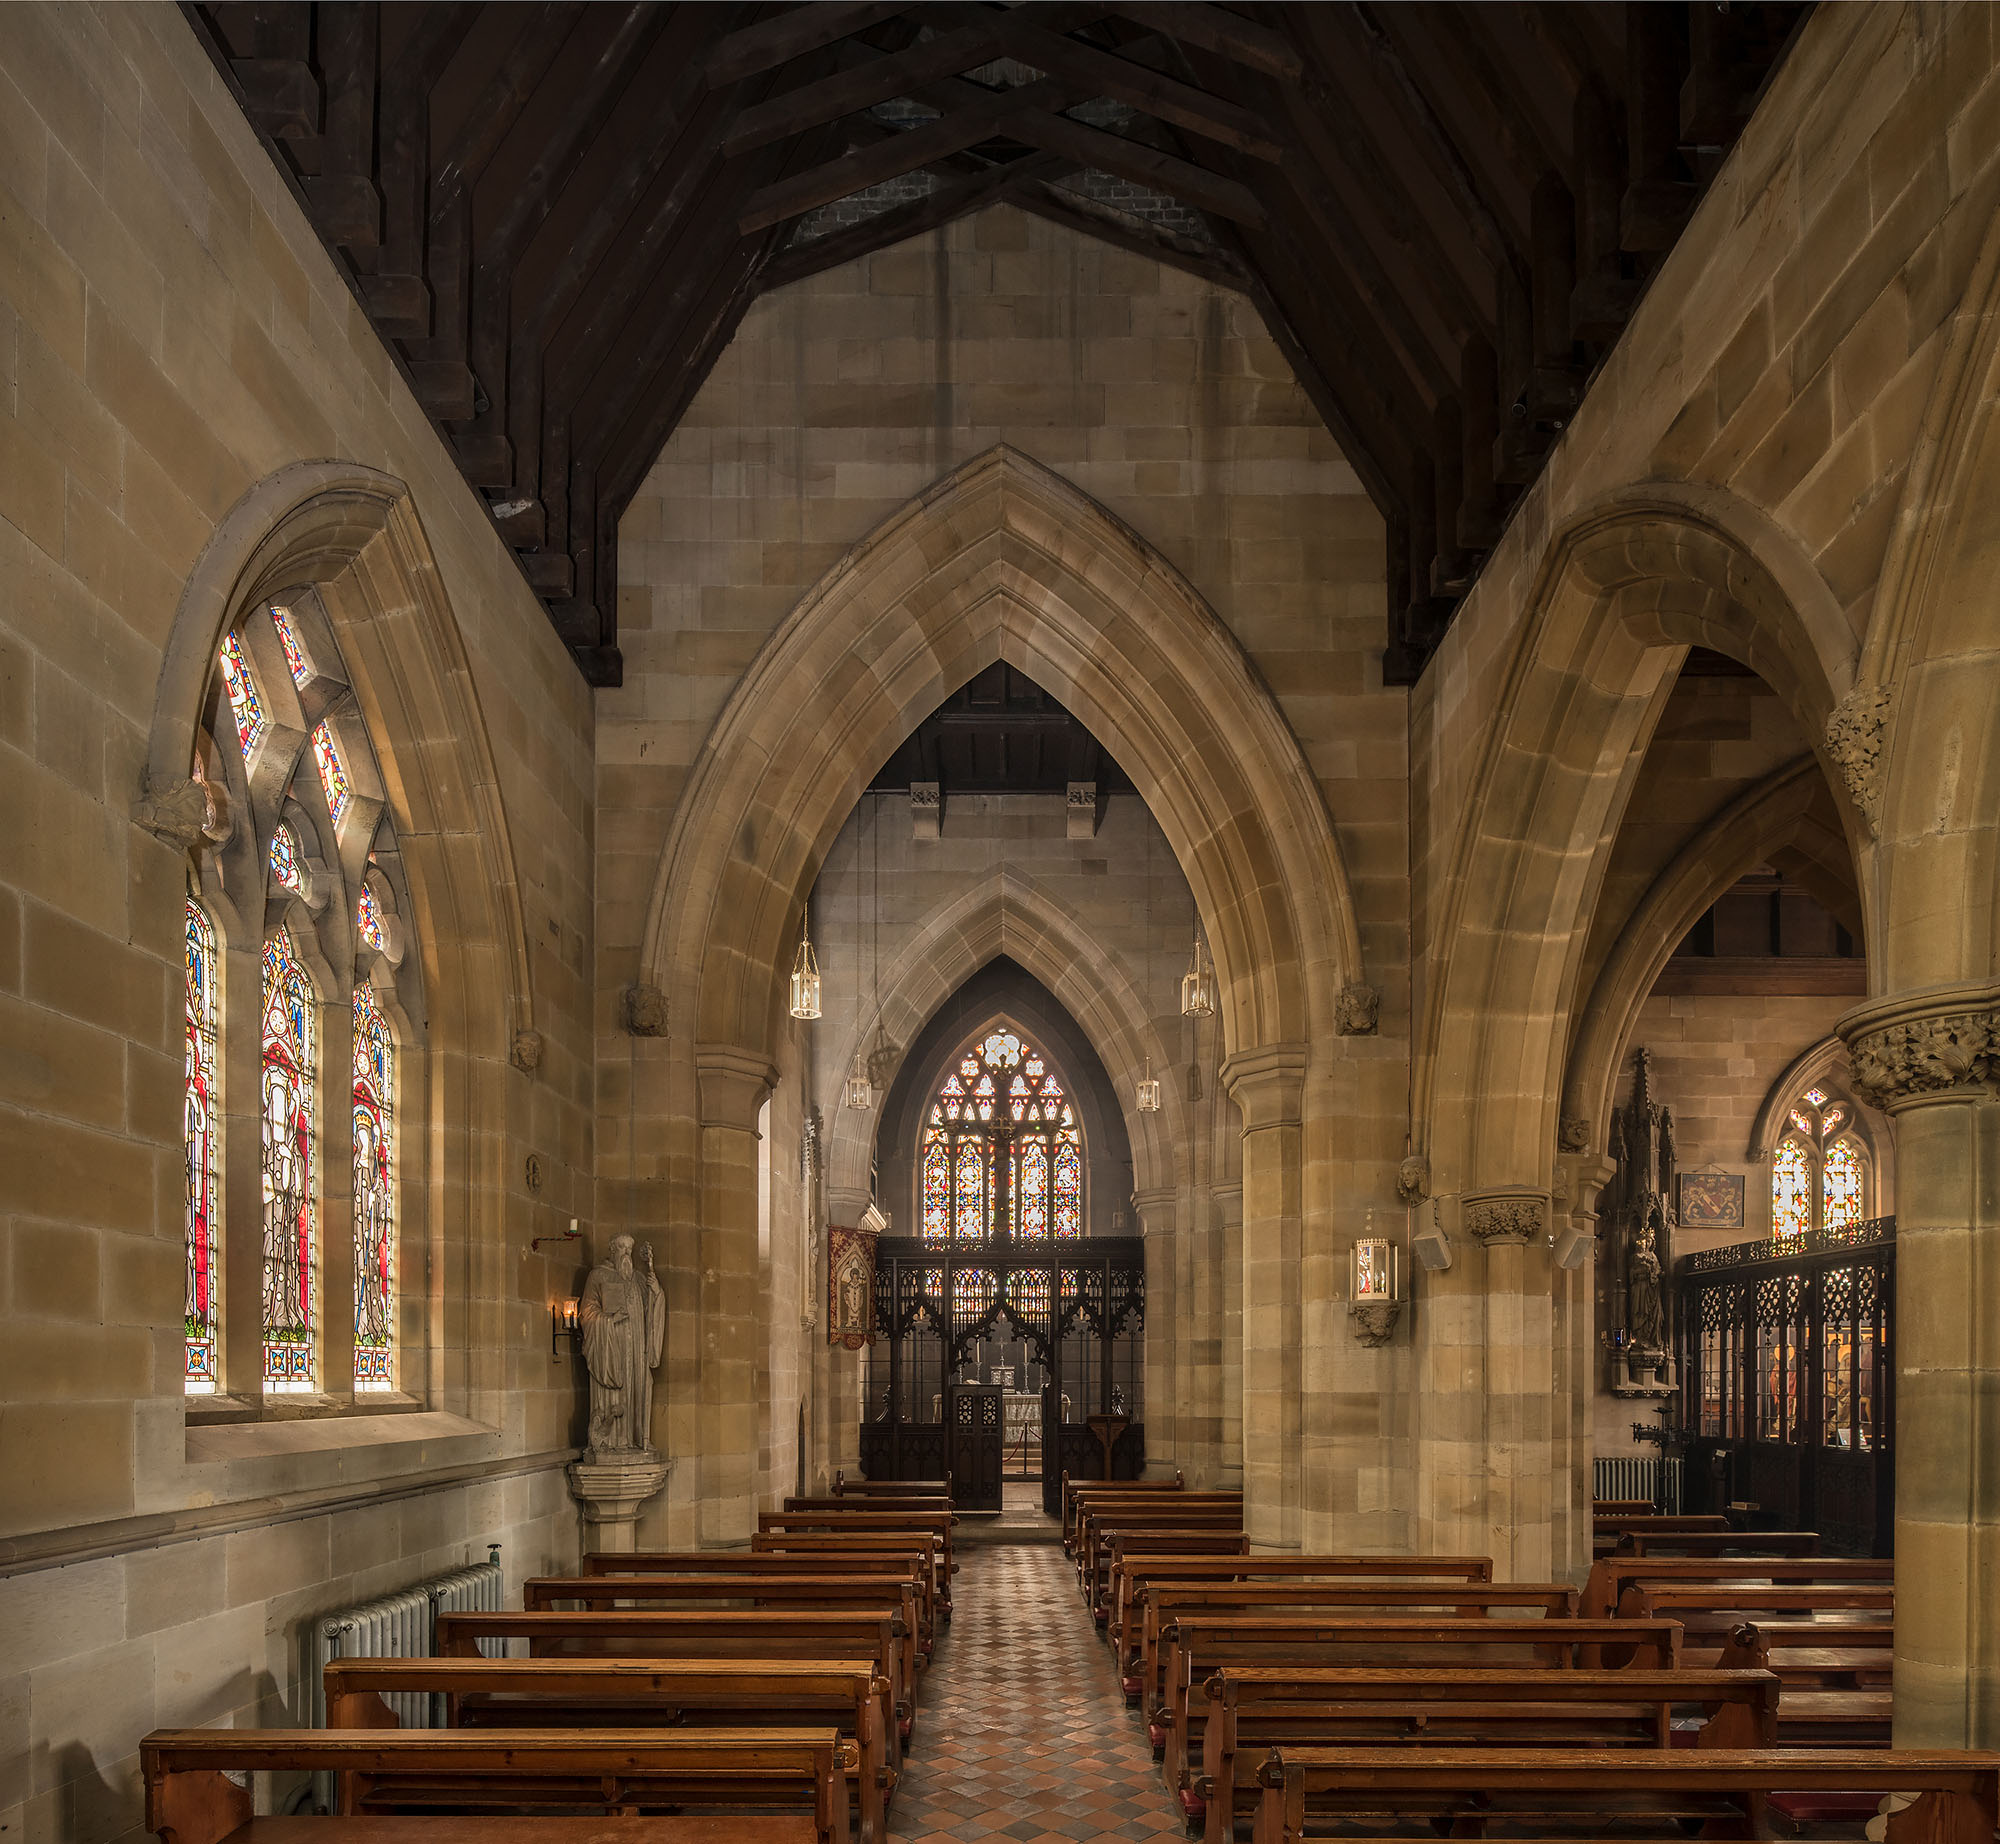 View from the nave looking east towards the chancel and chantry.